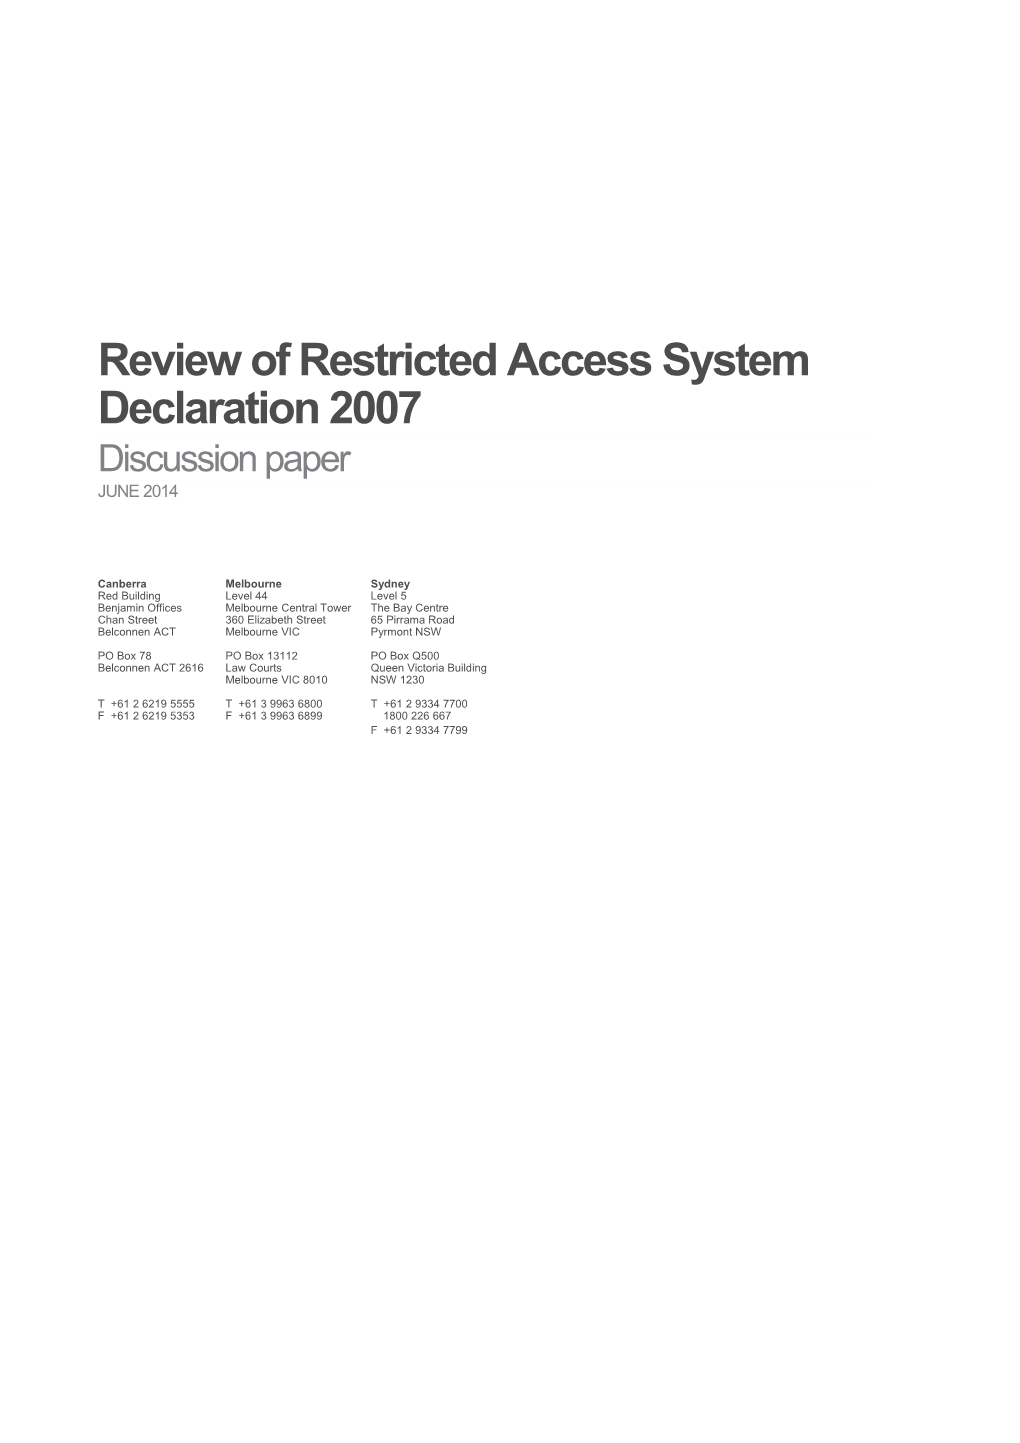 Review of Restricted Access System Declaration 2007